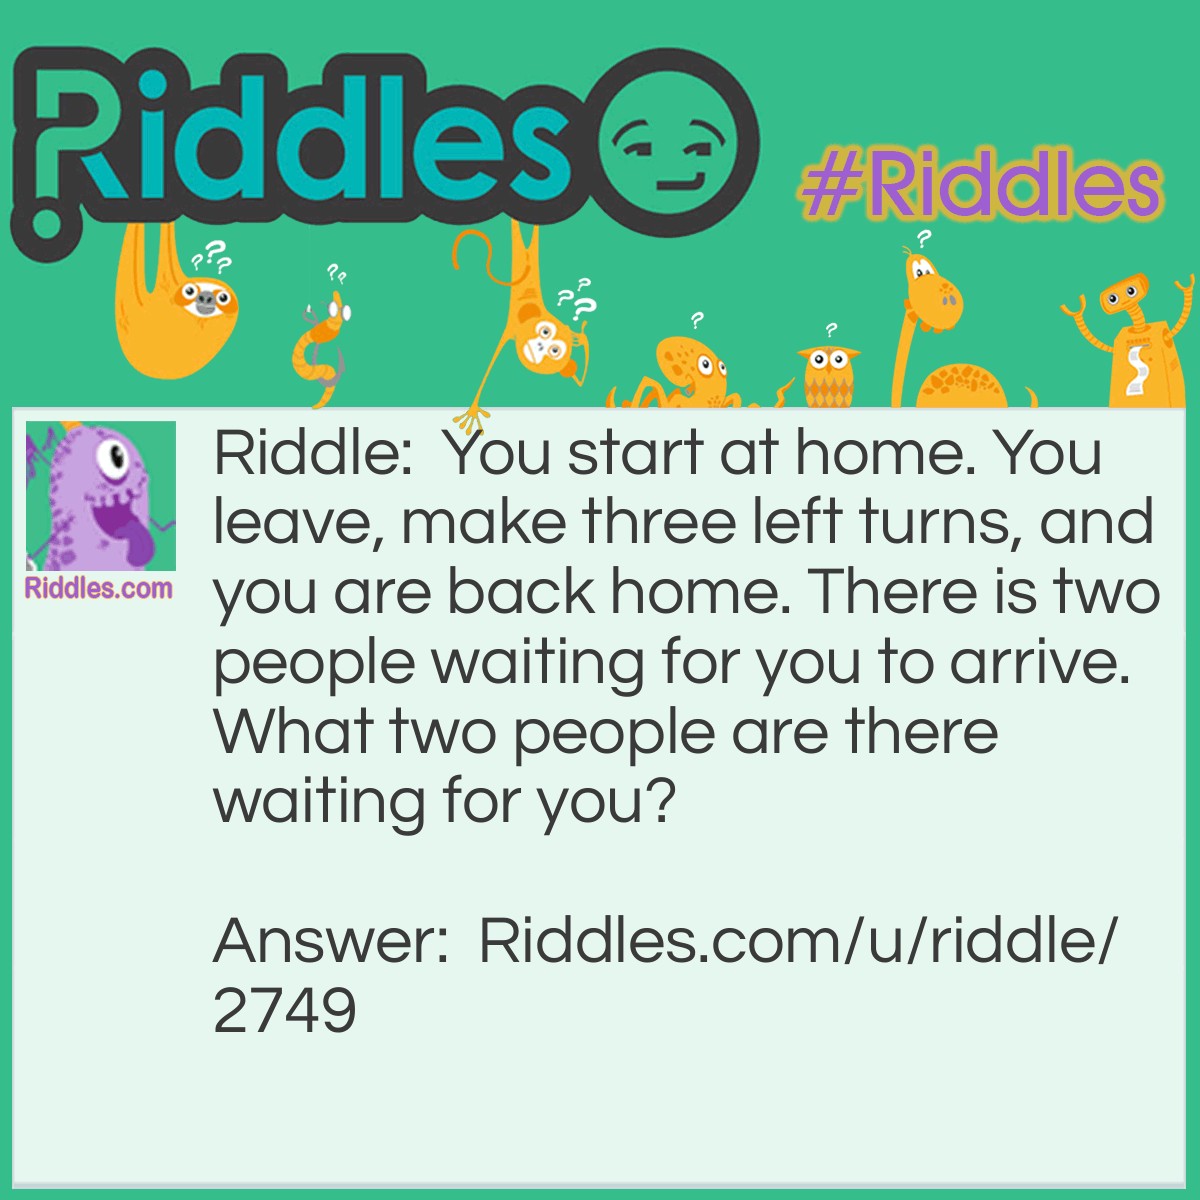 Riddle: You start at home. You leave, make three left turns, and you are back home. There is two people waiting for you to arrive. What two people are there waiting for you? Answer: A catcher and an Umpire.